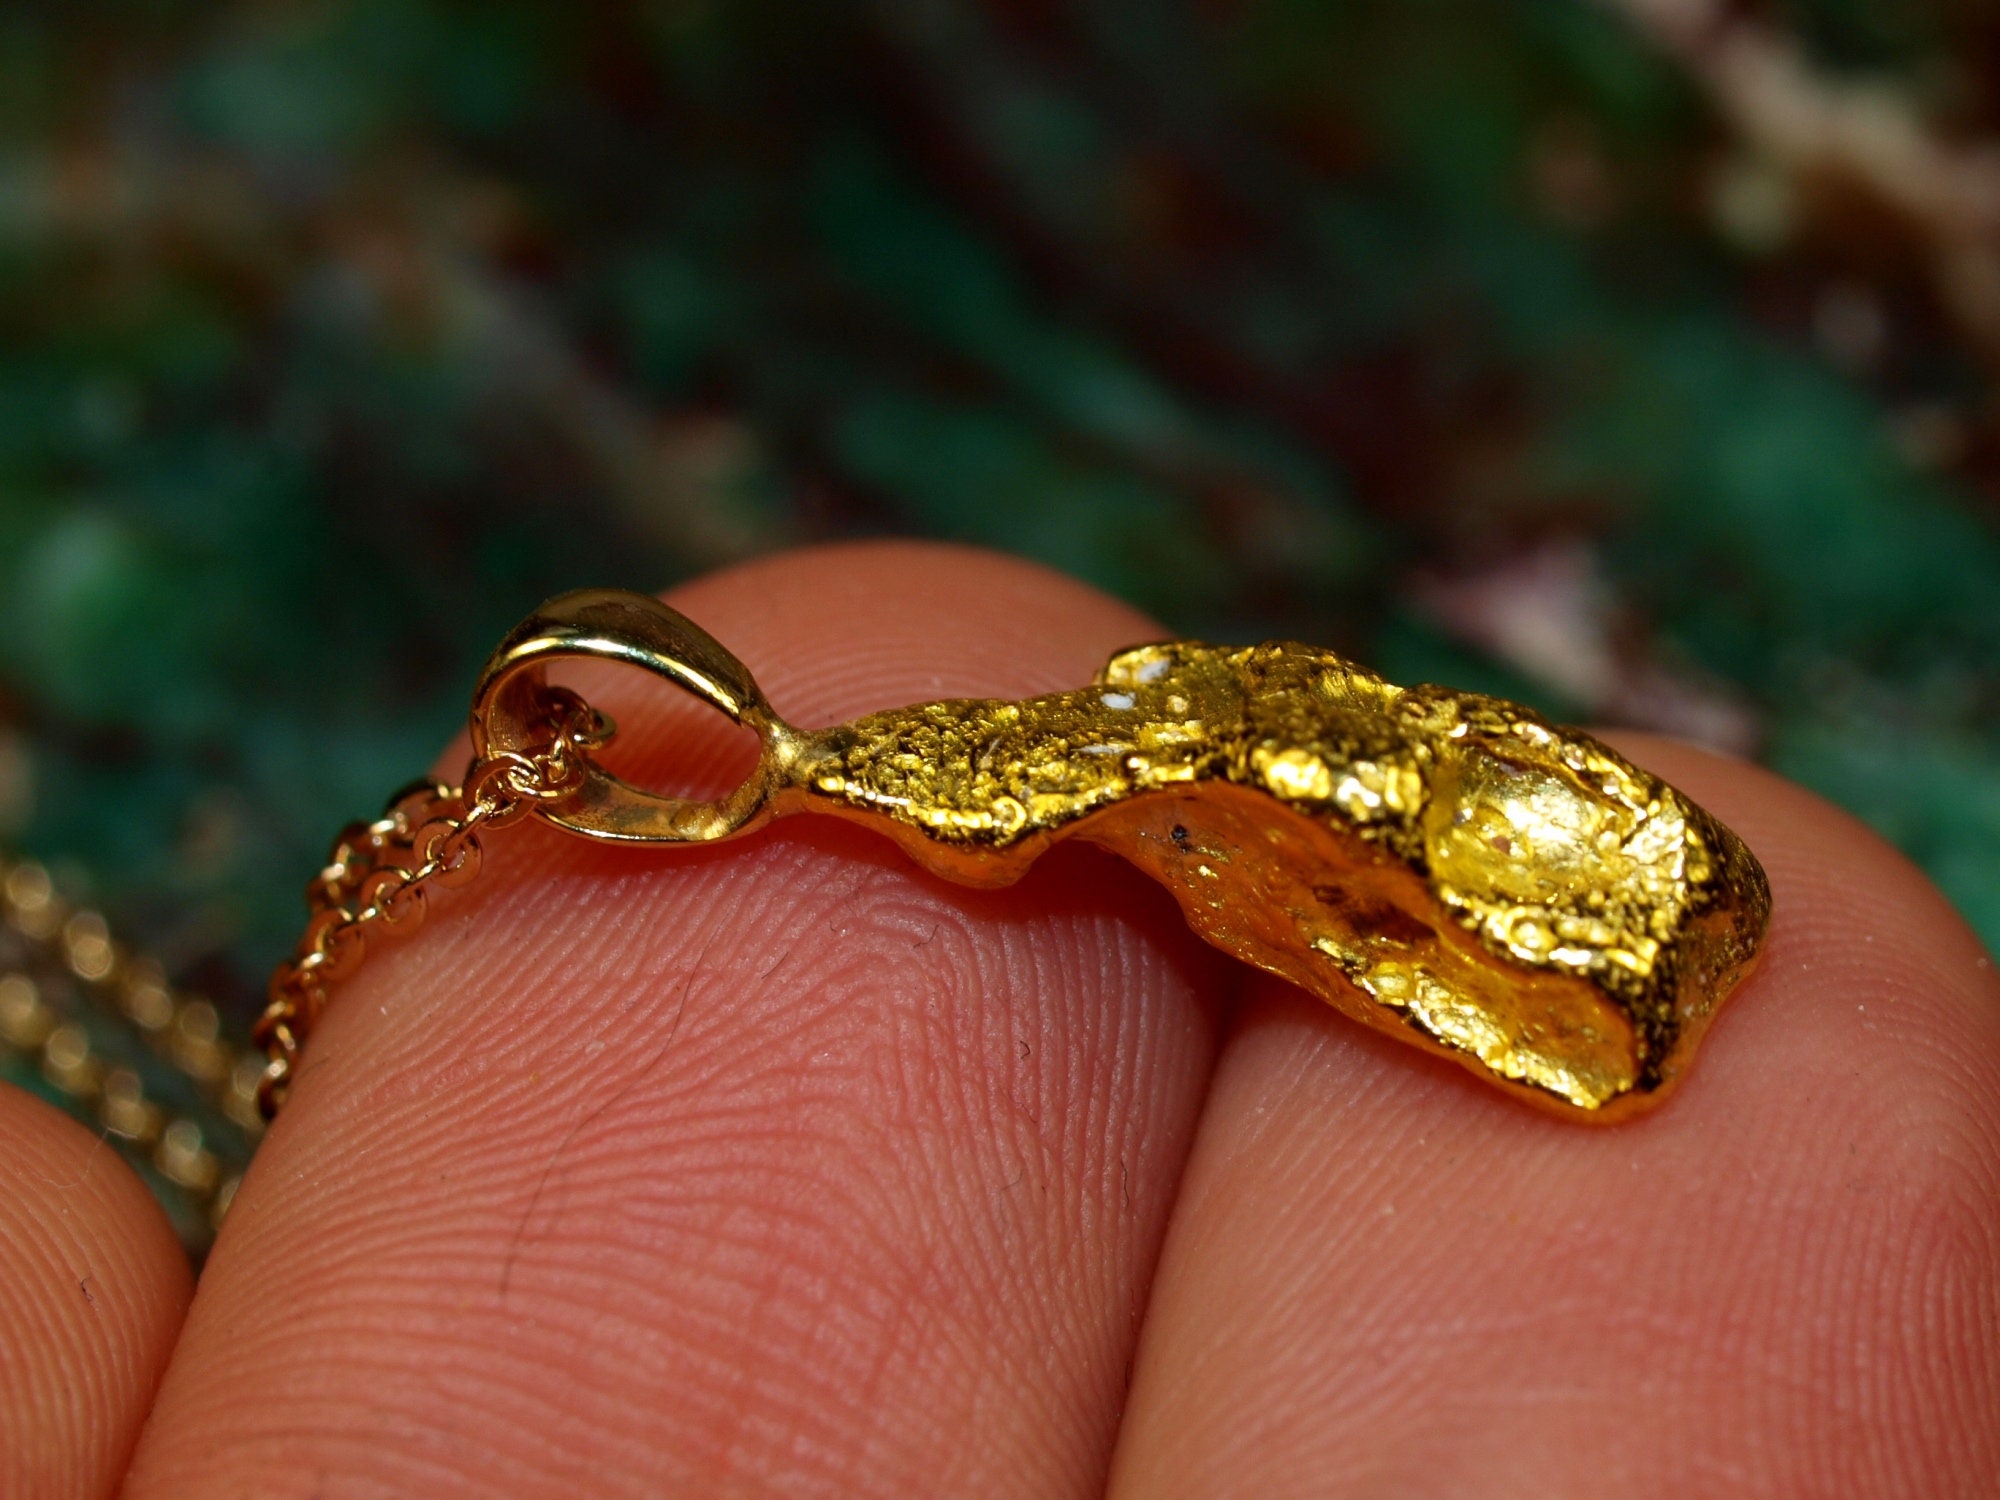 My Gold Nugget